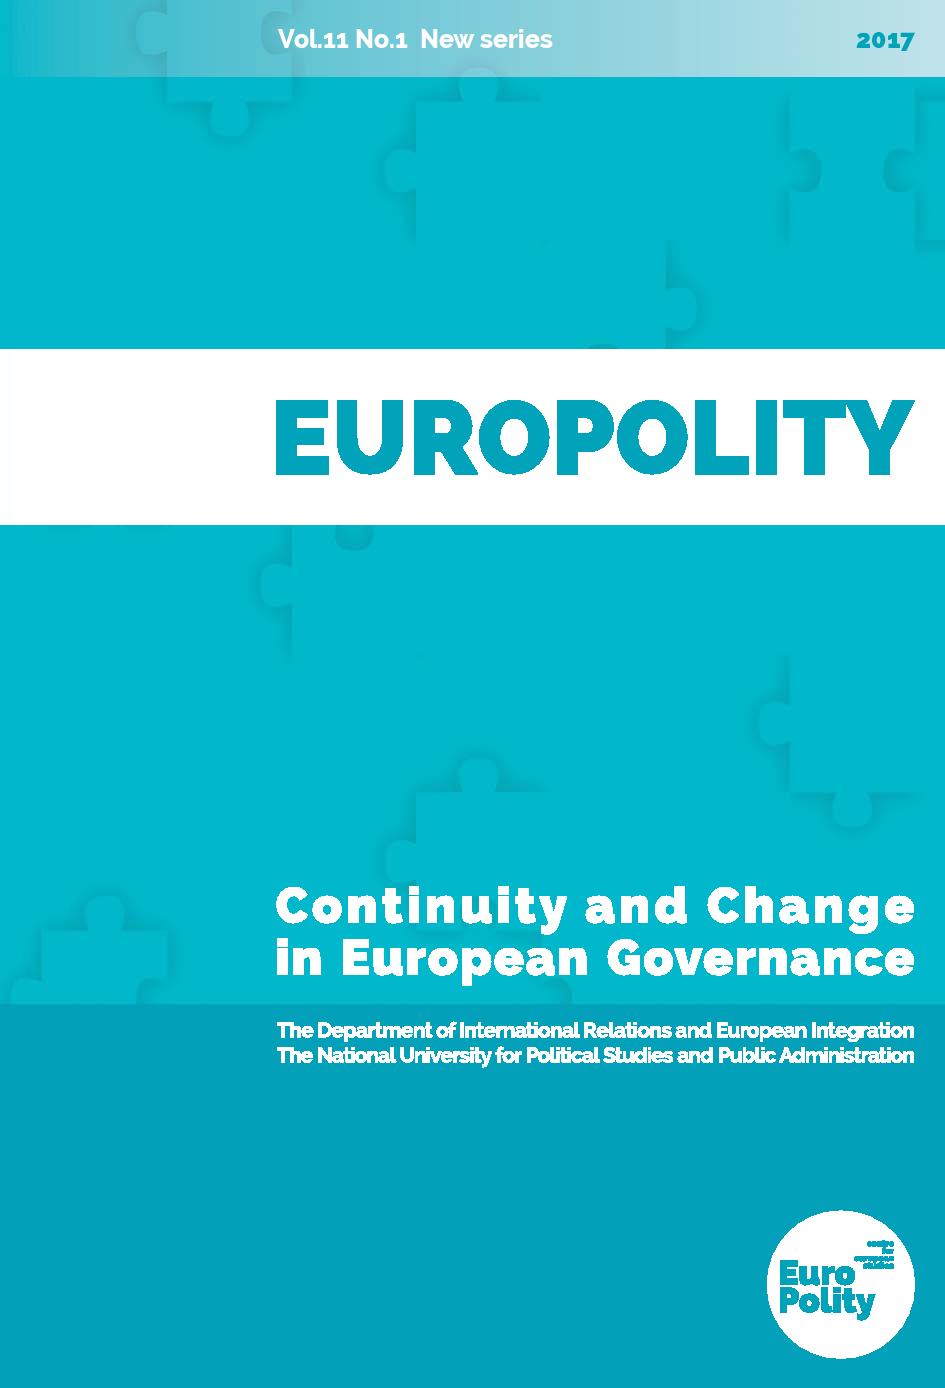 THE EUROPEAN ENERGY POLICY – A FRAMEWORK FOR DECREASING THE GAP BETWEEN MEMBER STATES. IS THE ENERGY MARKET LIBERALIZATION A SUSTAINABLE APPROACH OR AN ONGOING RISK Cover Image